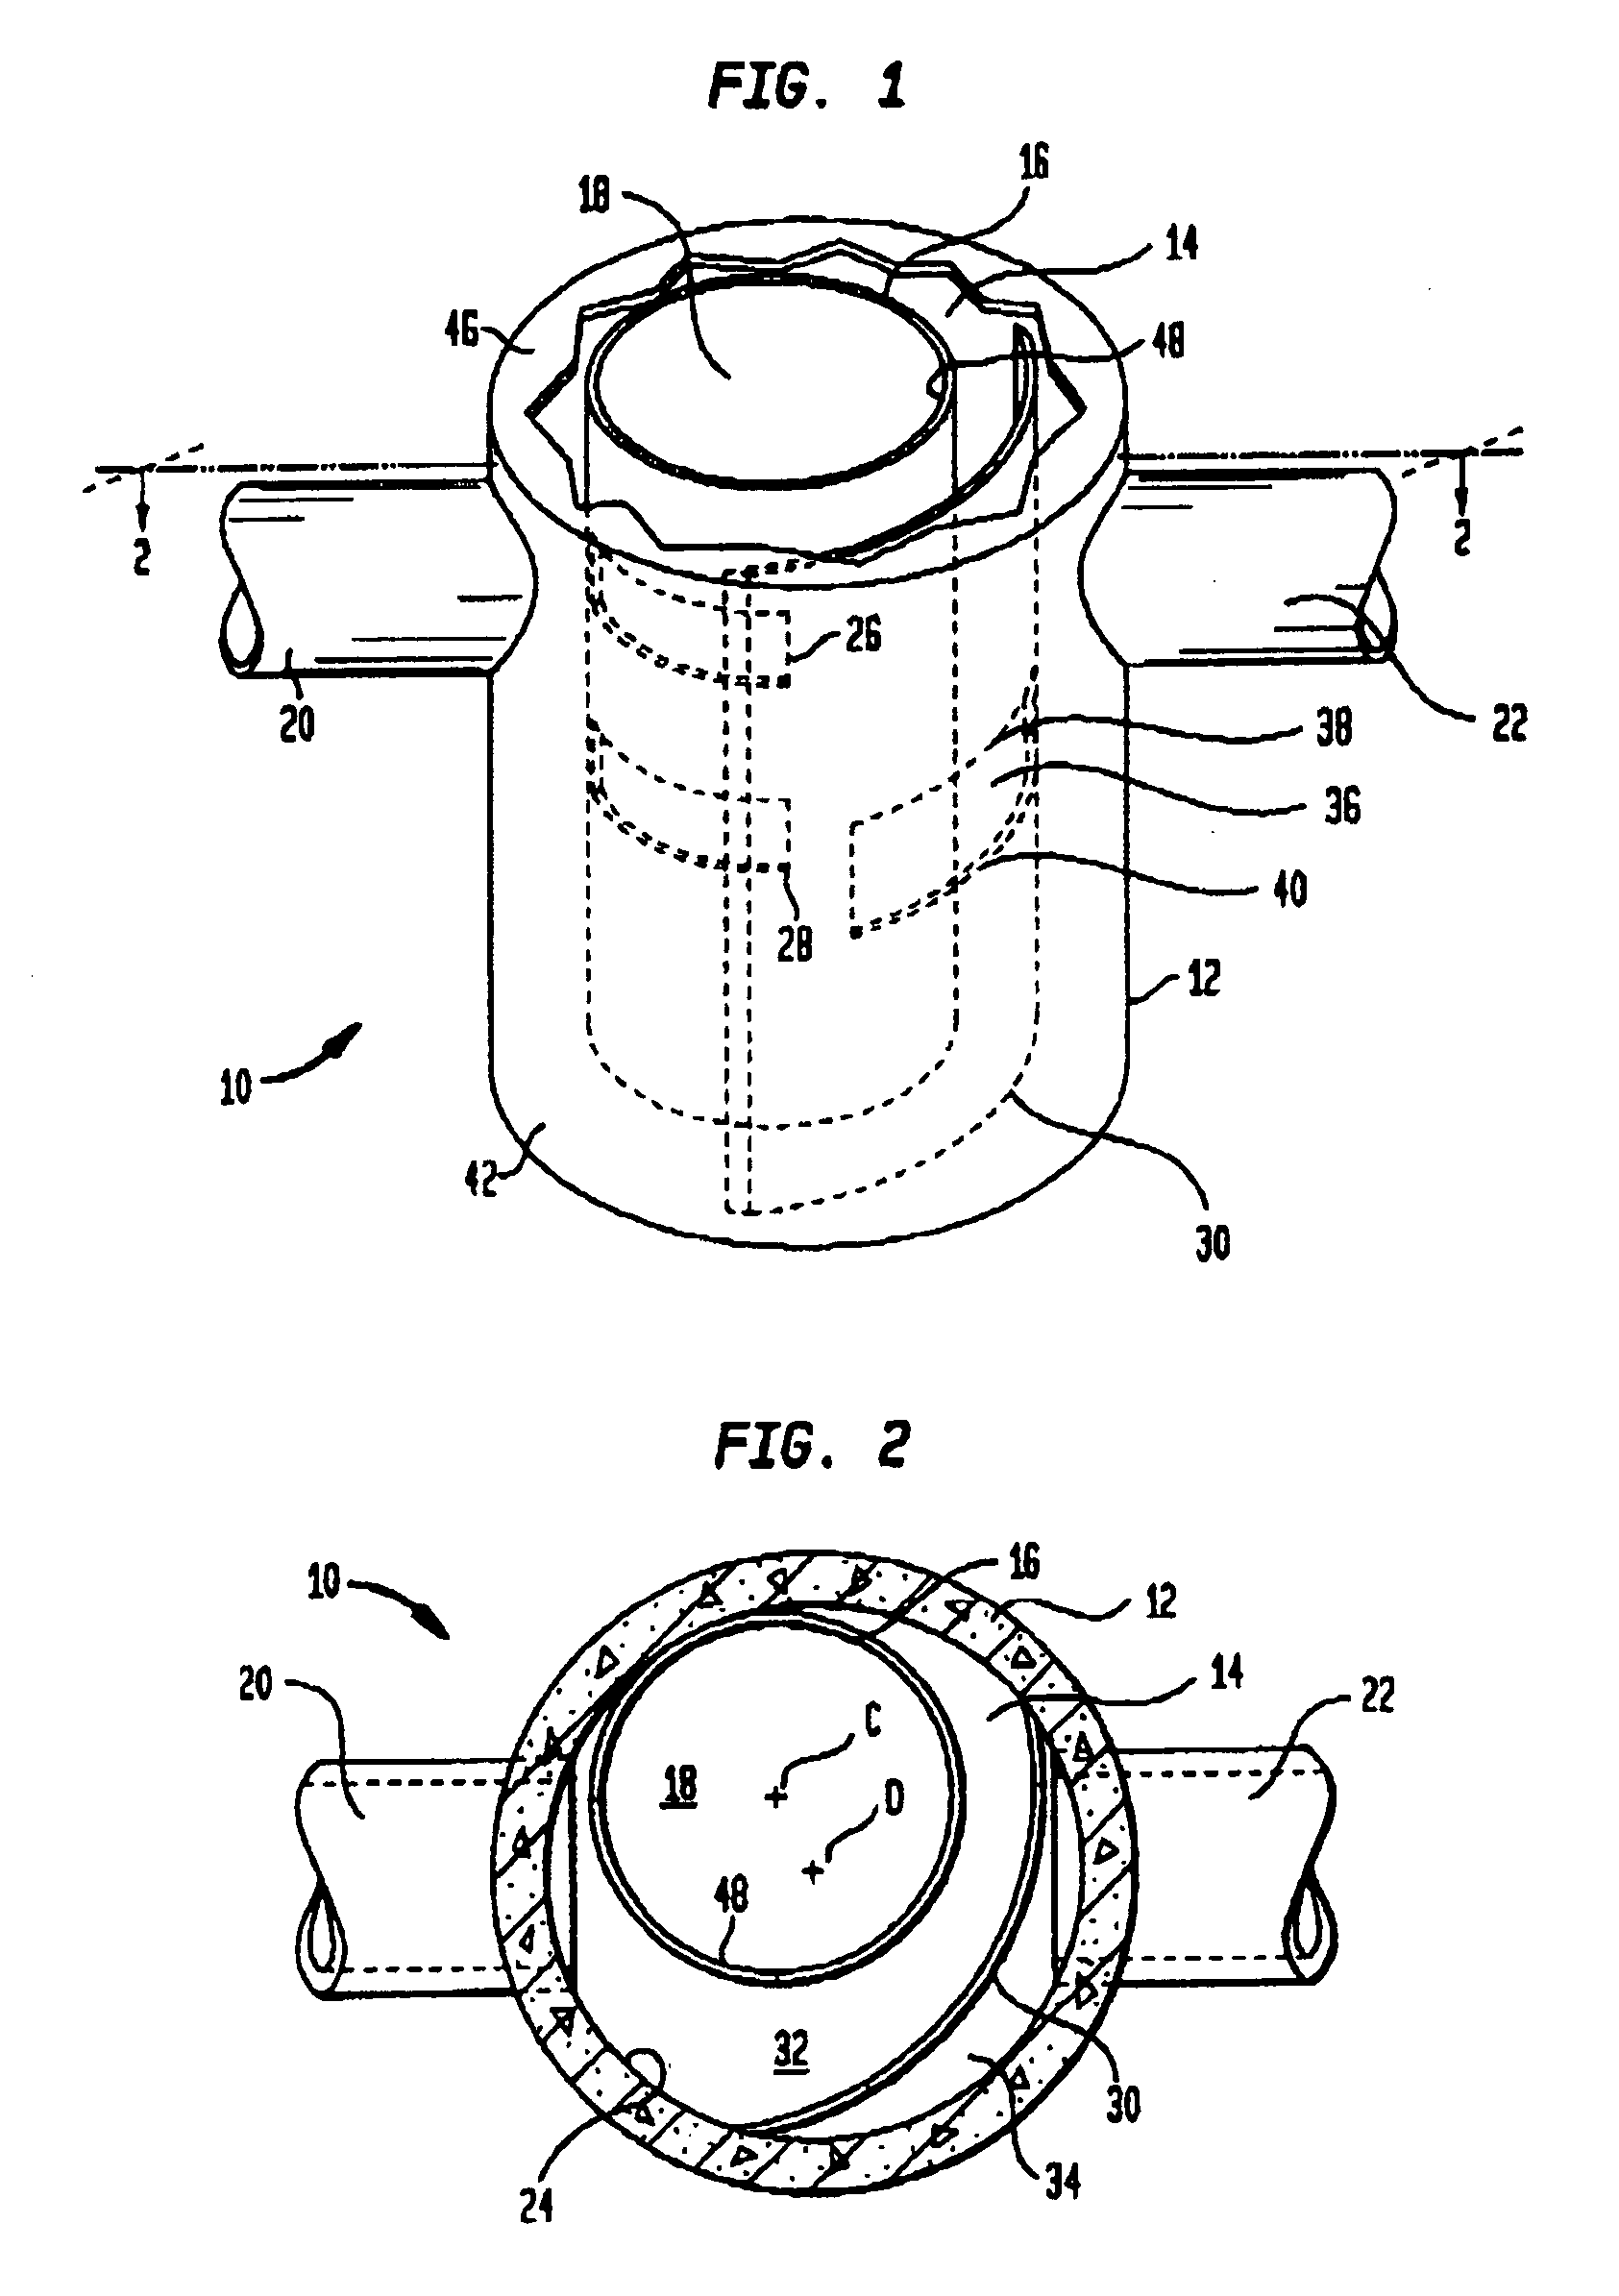 Apparatus for trapping floating and non-floating particulate matter